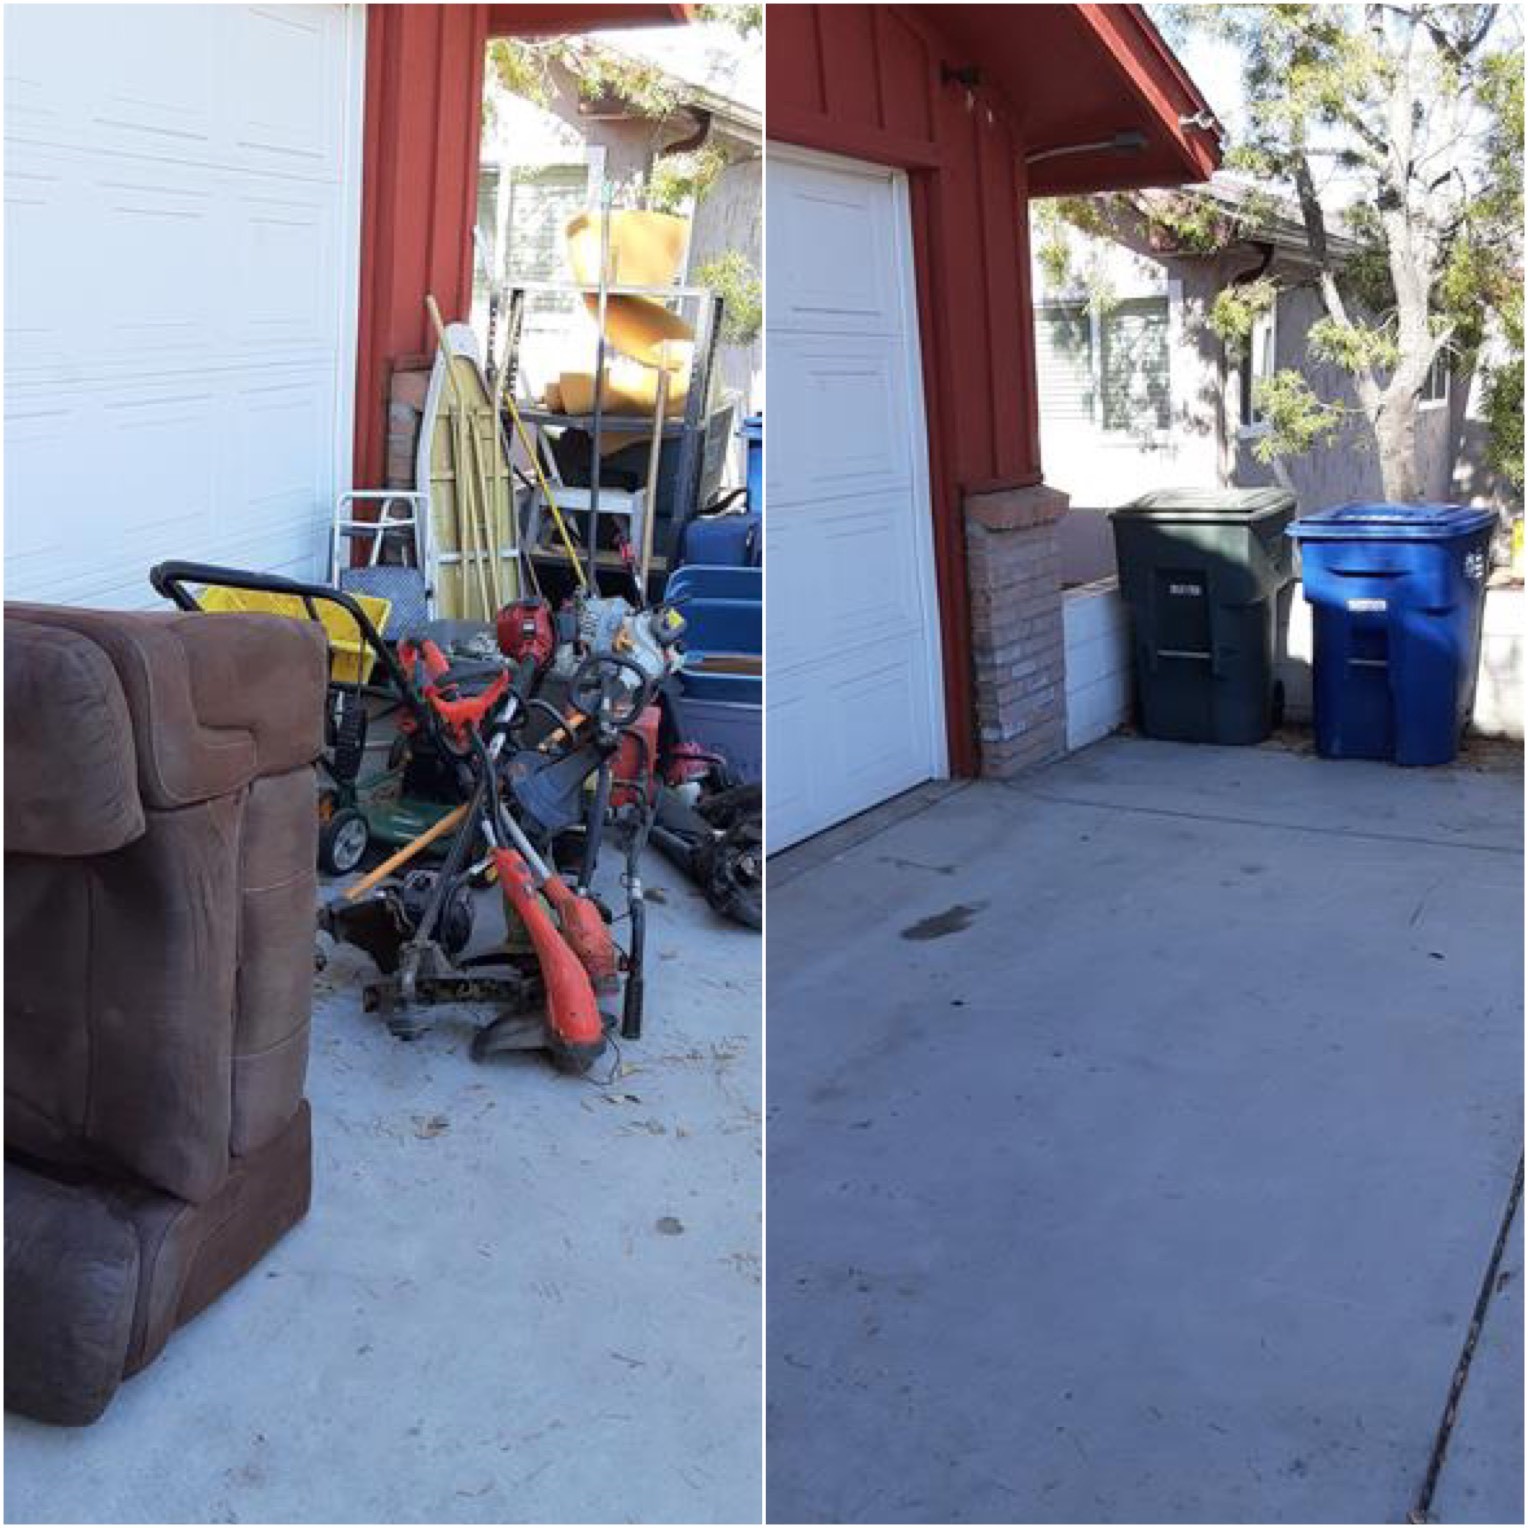 Before and after photo from a driveway junk removal job. The customer had miscellaneous items including metal, furniture, old storage bins, etc. and Junk King San Diego was able to haul everything away. We are providing touchless pick ups for COVID.